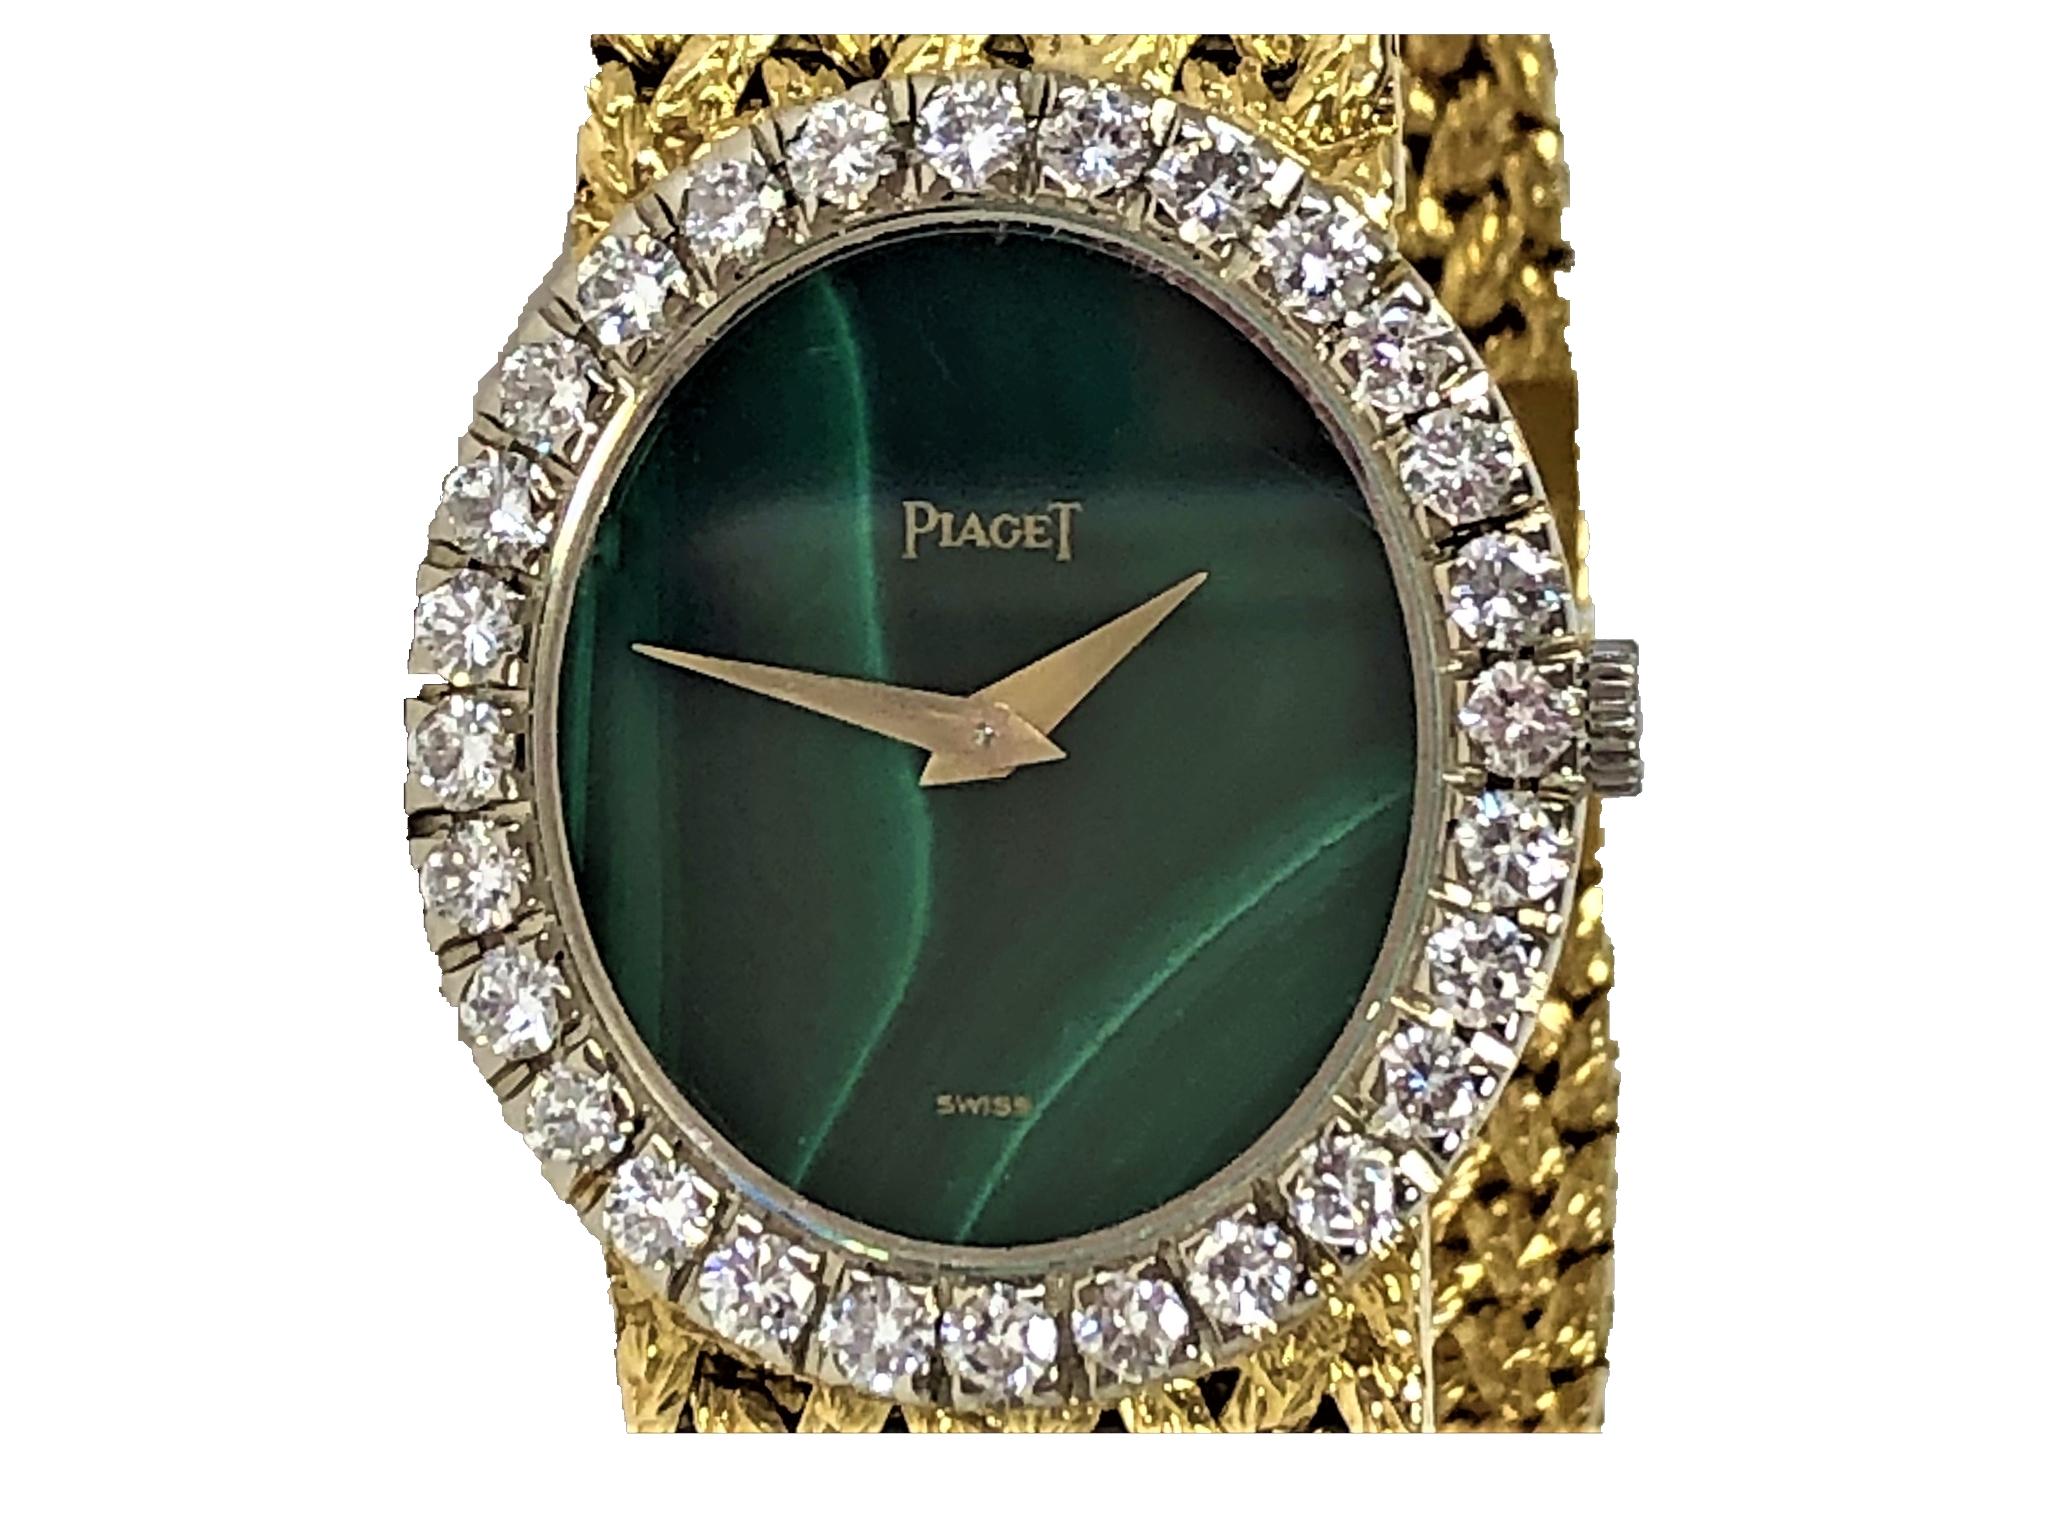 Originally retailed by Van Cleef and Arpels, this 18K yellow gold, malachite dial with diamond bezel, ladies Piaget, is numbered and signed V C A on the back of the clasp. The richly colored, deep green vertical oval malachite dial is surrounded by